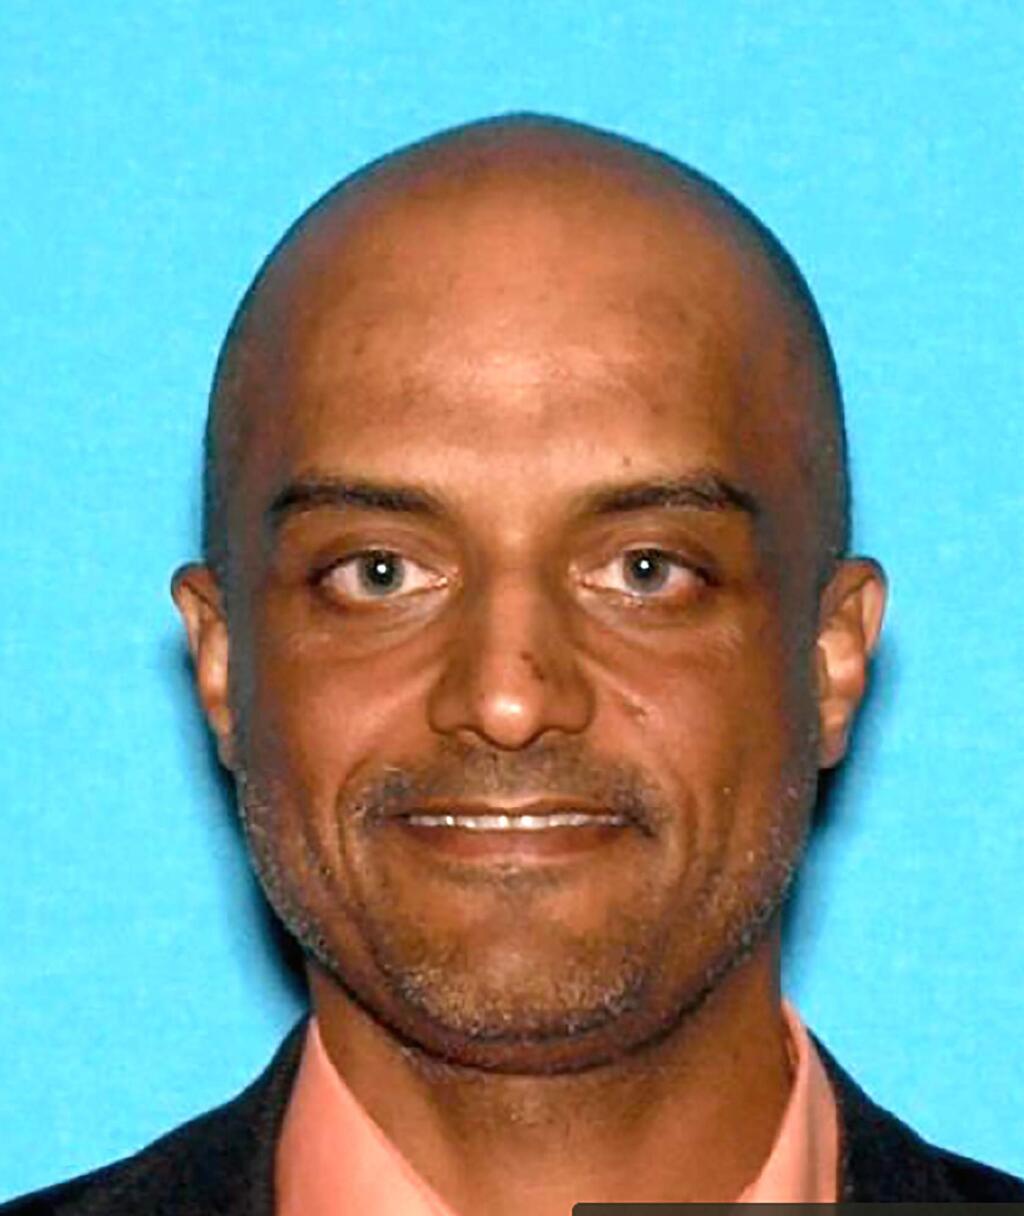 This undated photo provided by the Santa Cruz County Sheriff's Office shows Tushar Atre who was kidnapped from his home during a crime. Authorities say the 50-year-old owner of a digital marketing company was abducted on Tuesday, Oct. 1, 2019, from his home in Santa Cruz, Calif., and the man's white BMW was later located along with a dead body, which has not been identified. (Santa Cruz County Sheriff's Office via AP)